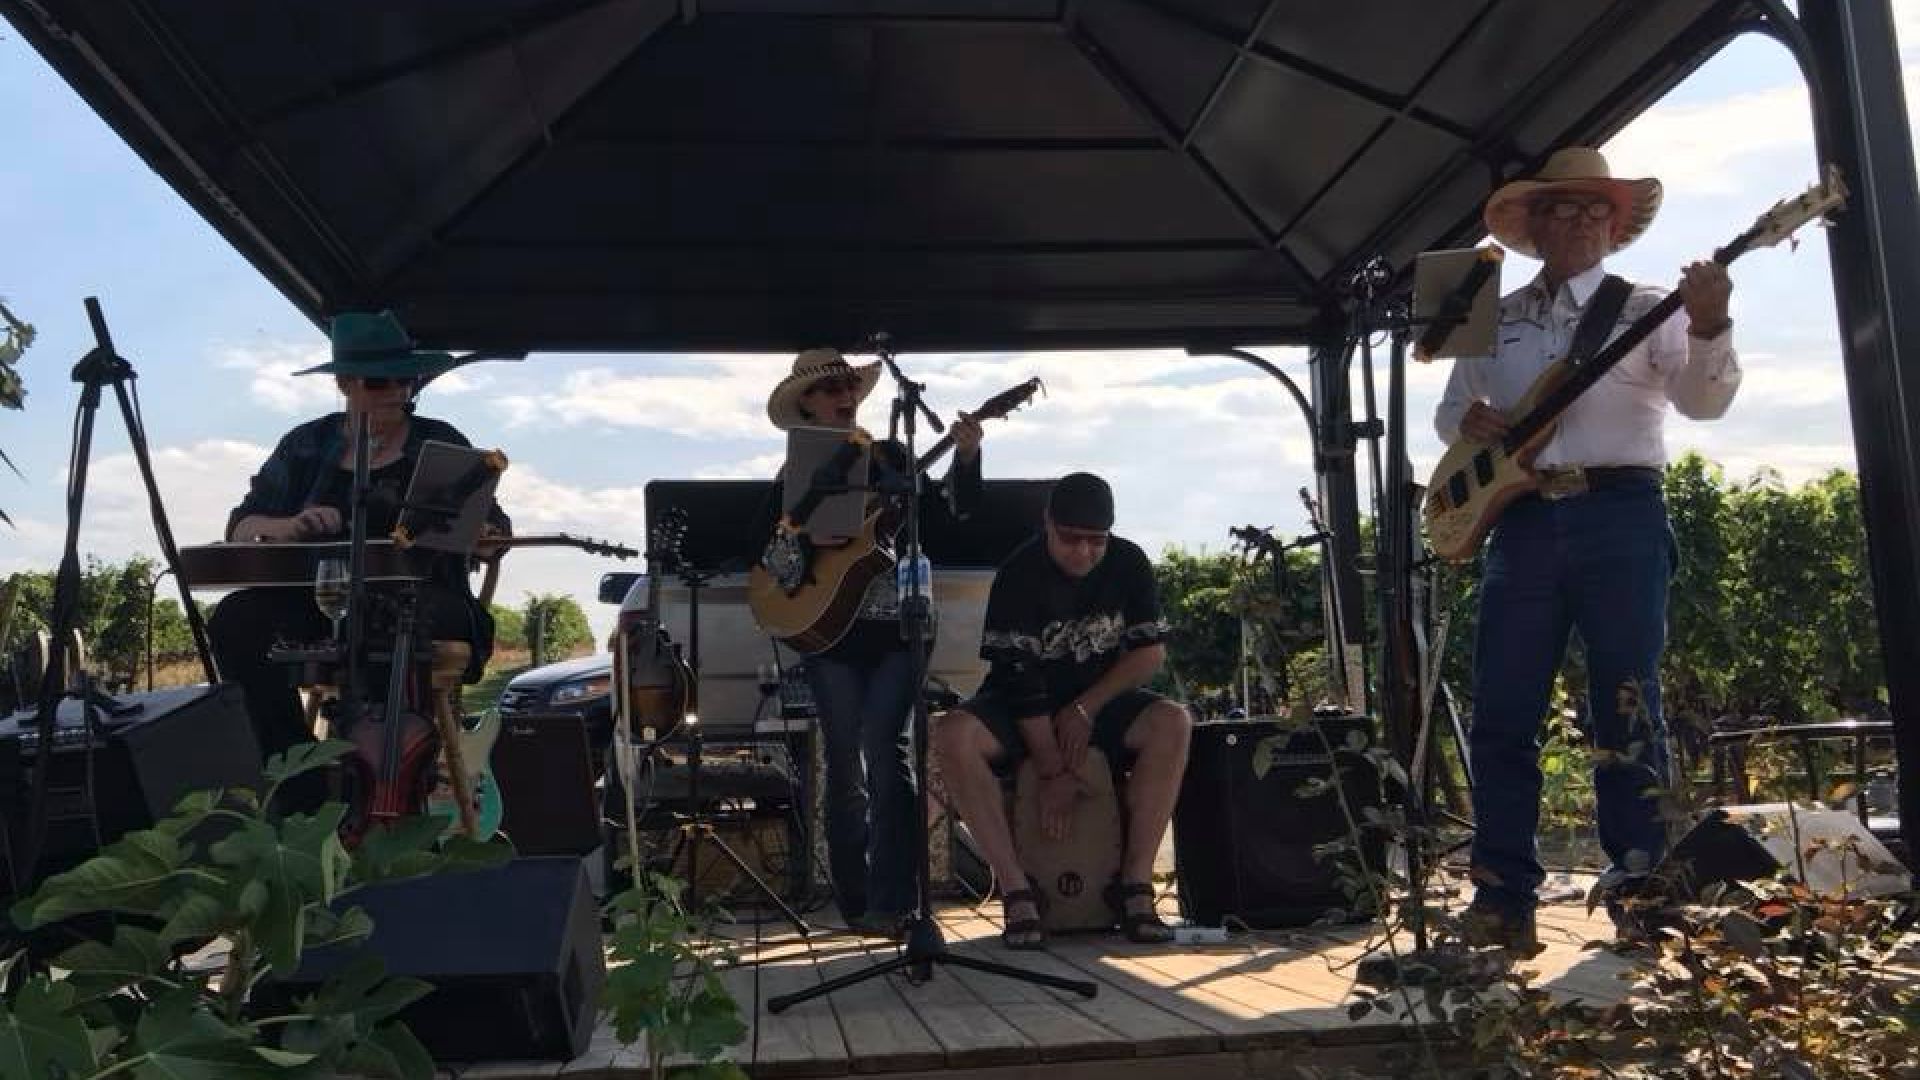 Band of four performing at Quinta Ferreira Winery